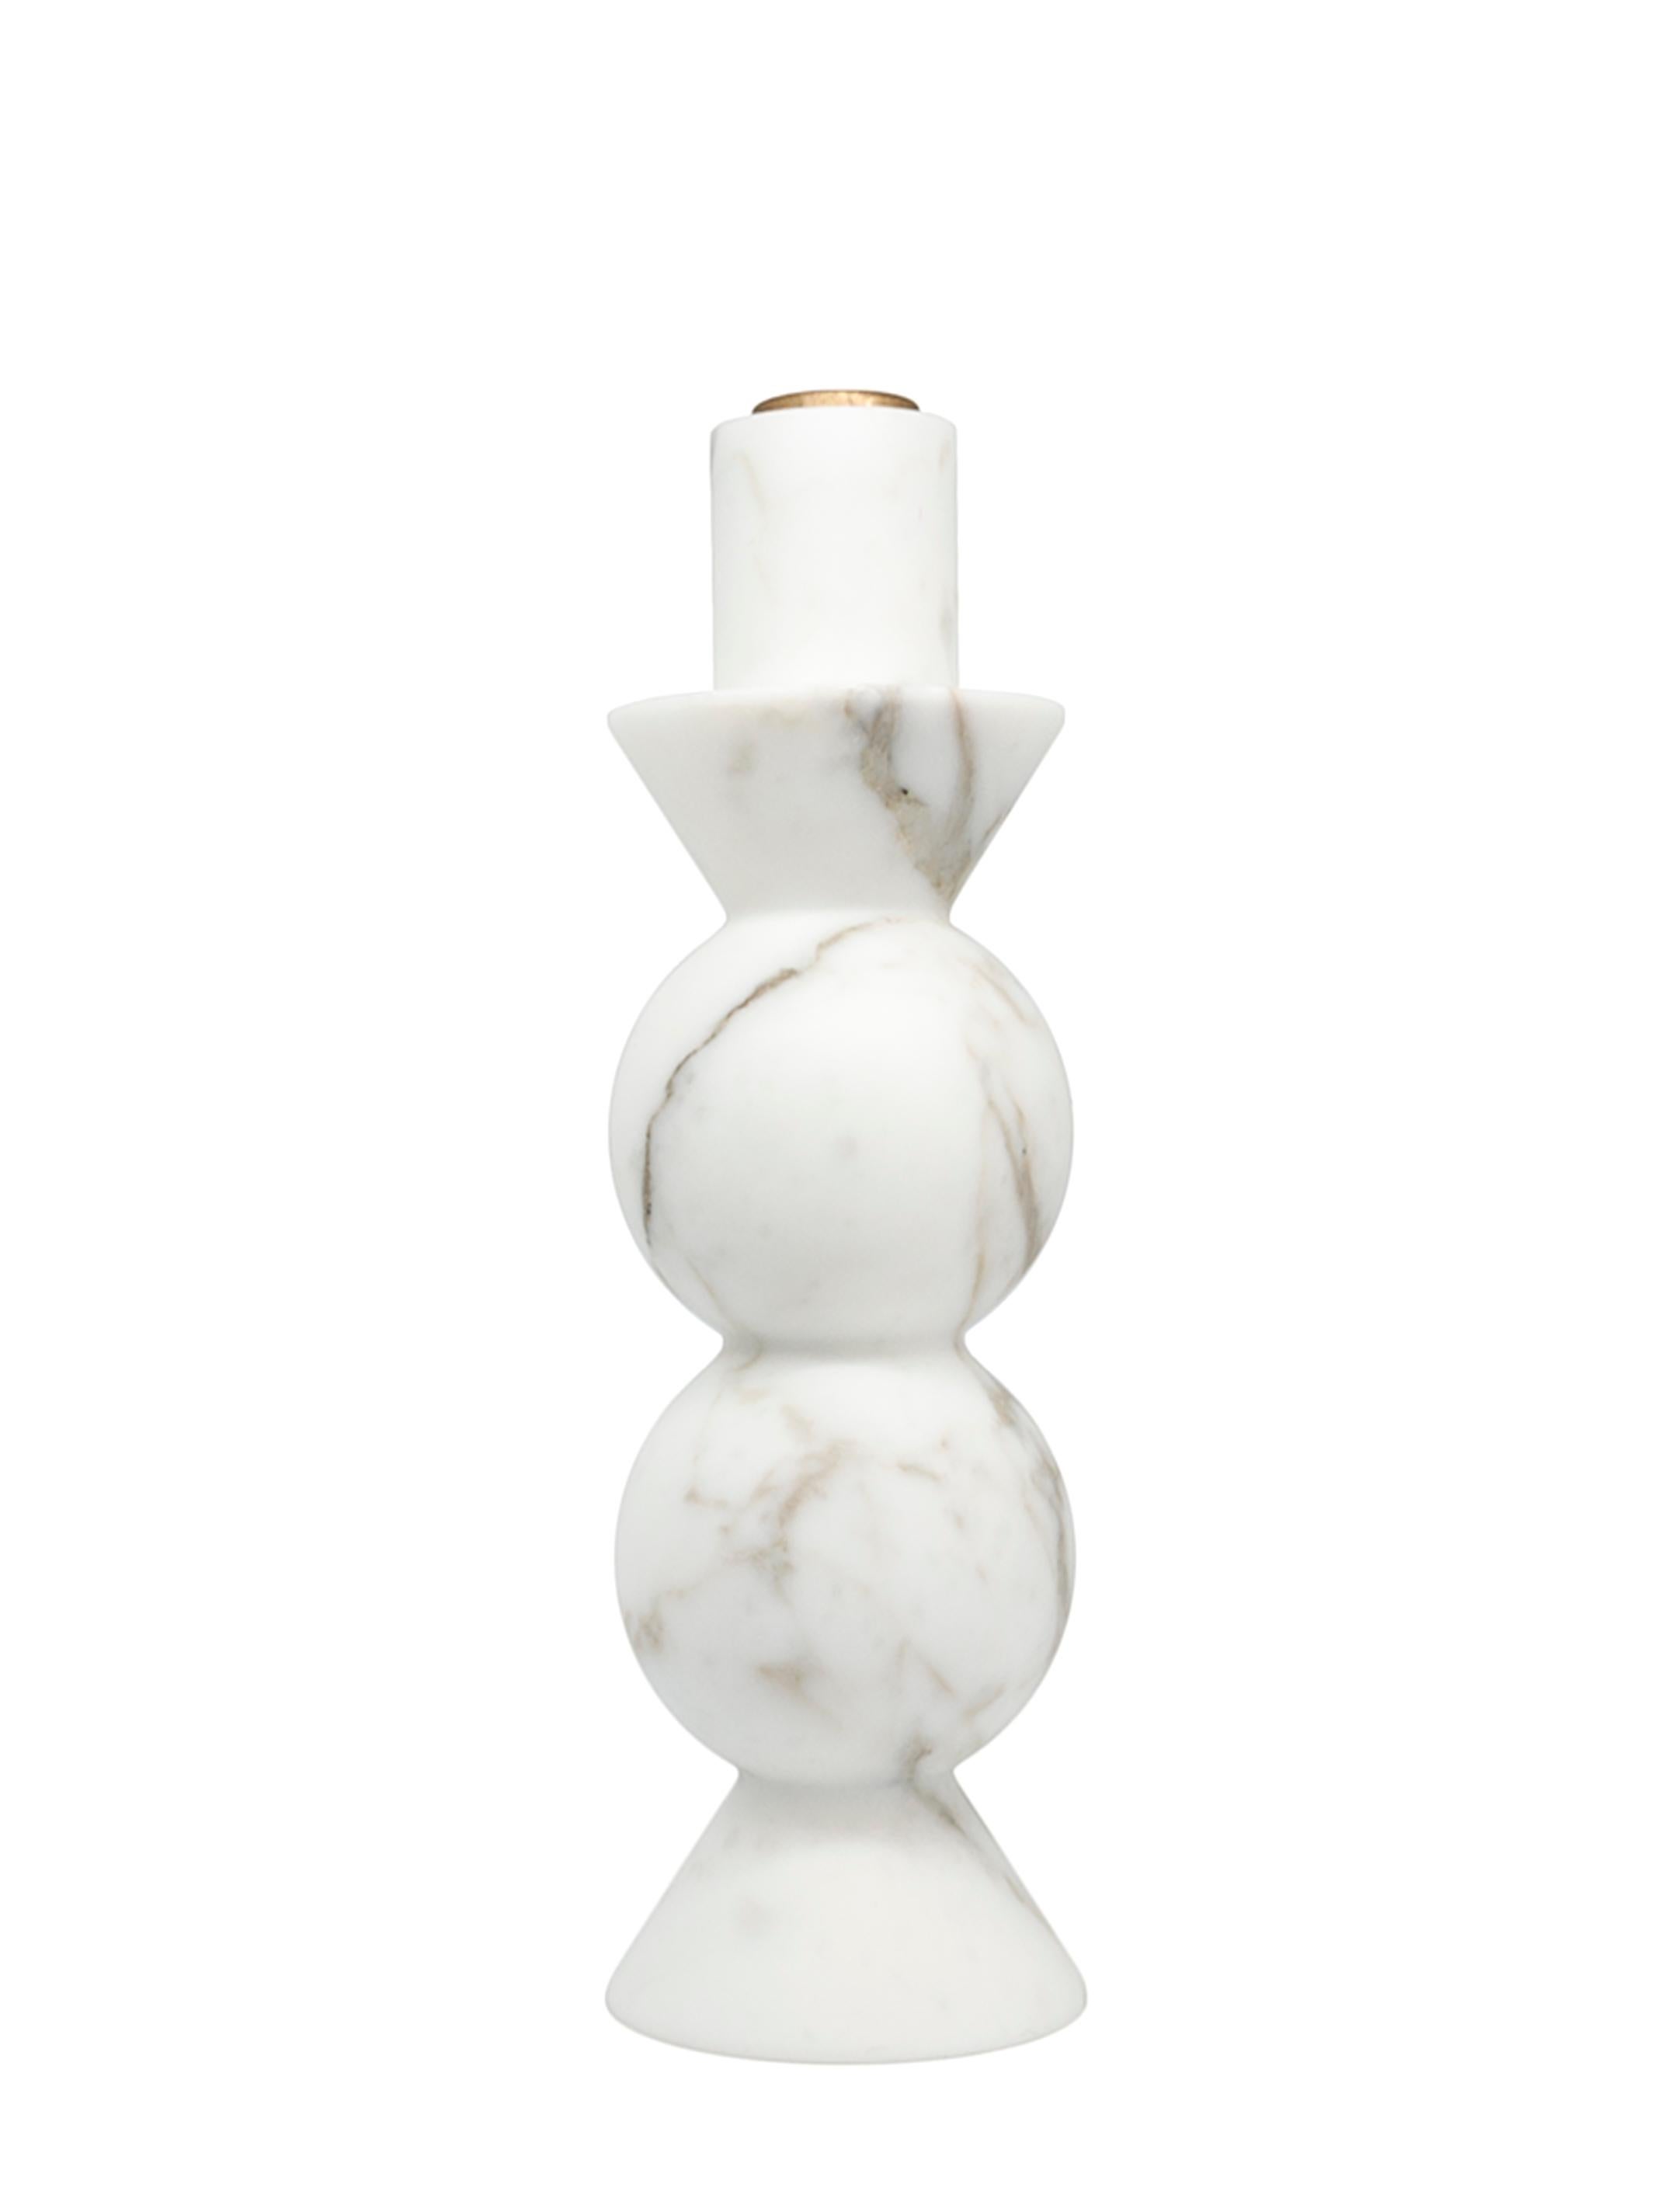 High rounded unicolor candleholder in white Carrara marble and brass.
-Jacopo Simonetti design for FiammettaV-
Each piece is in a way unique (every marble block is different in veins and shades) and handmade by Italian artisans specialized over